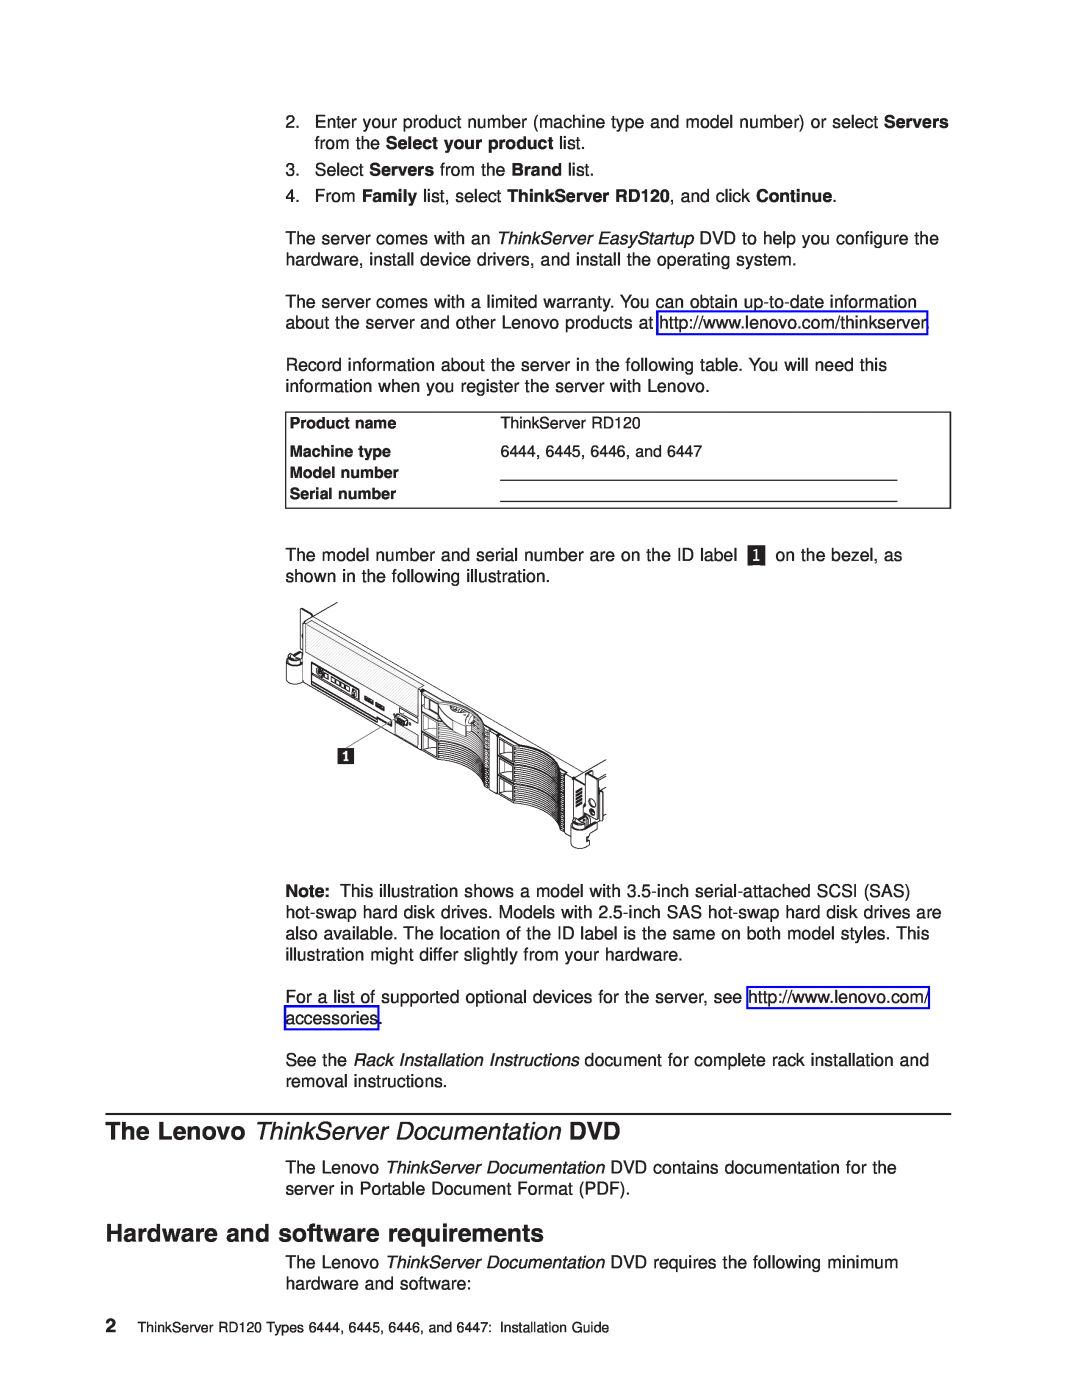 Lenovo 6447, 6446, 6445, 6444 manual Hardware and software requirements, The Lenovo ThinkServer Documentation DVD 